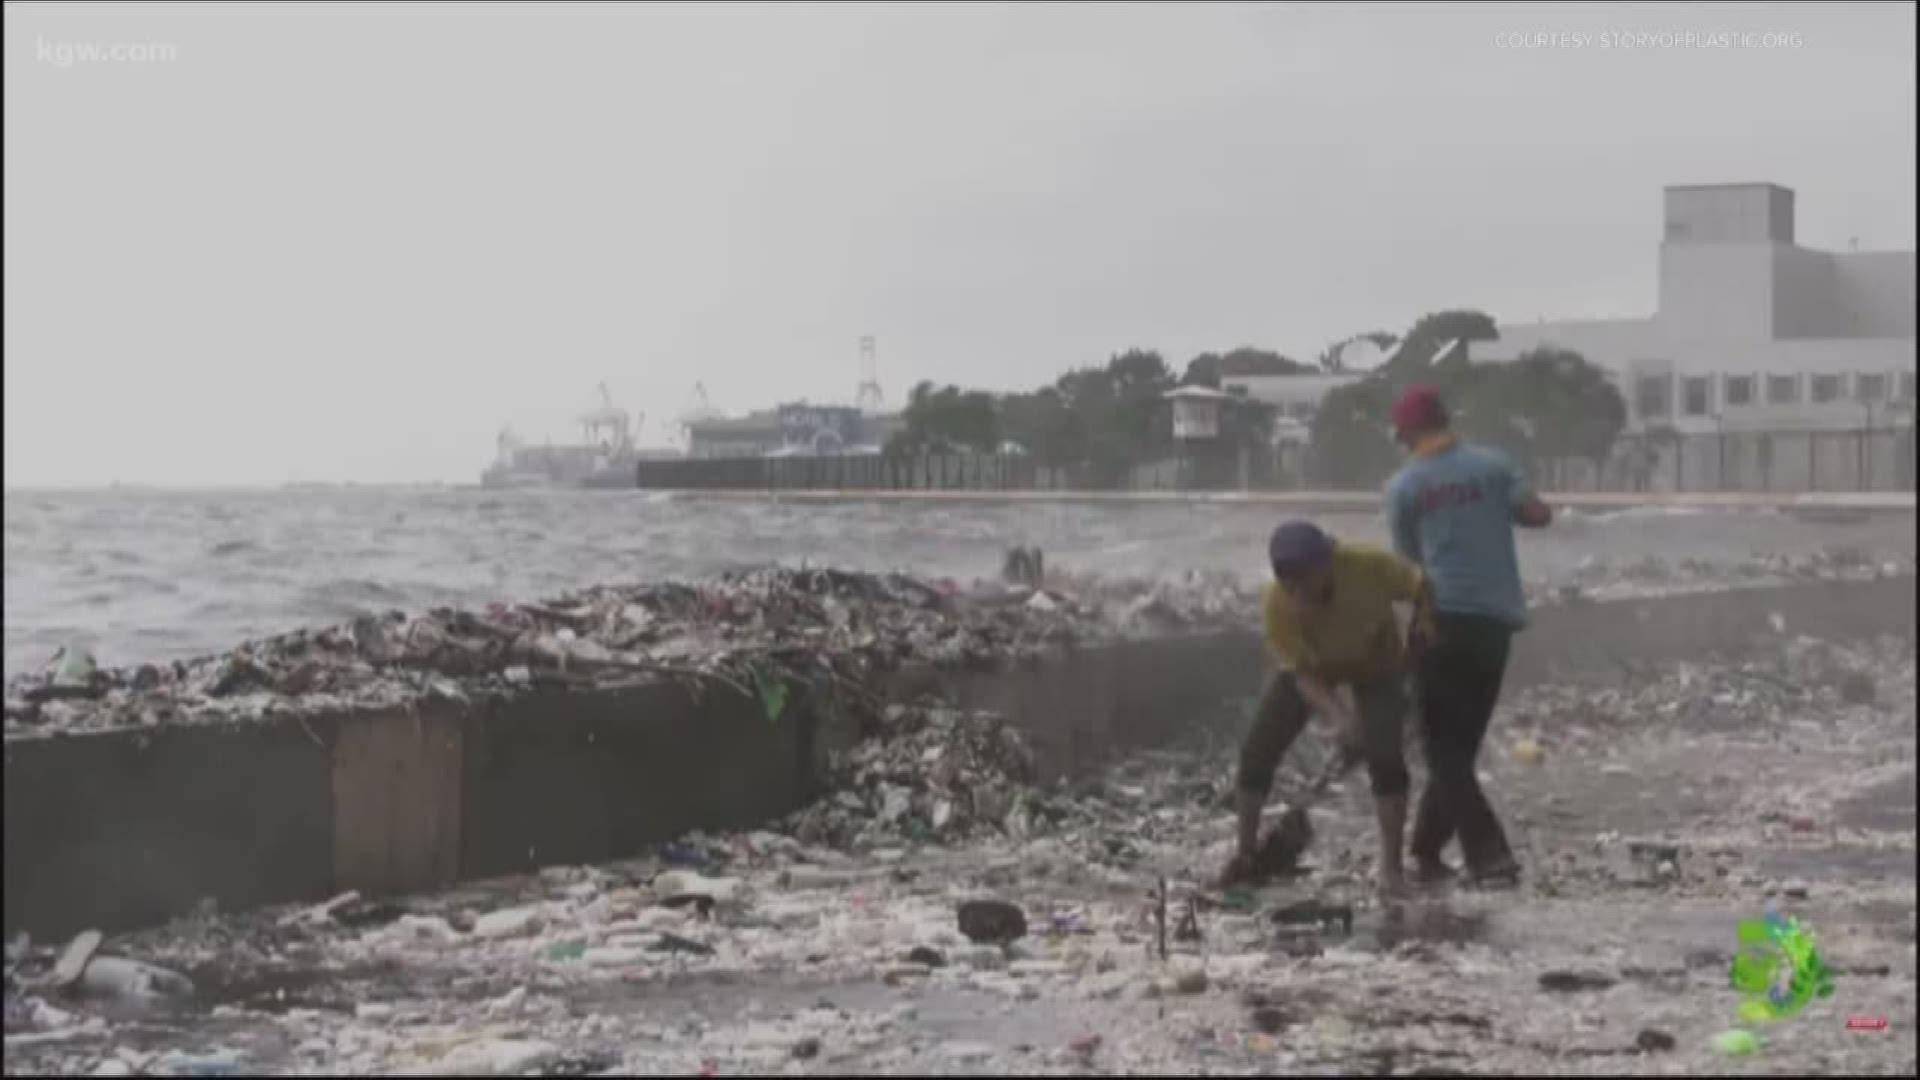 A local filmmaker is telling the story of the plastic crisis in a new documentary.